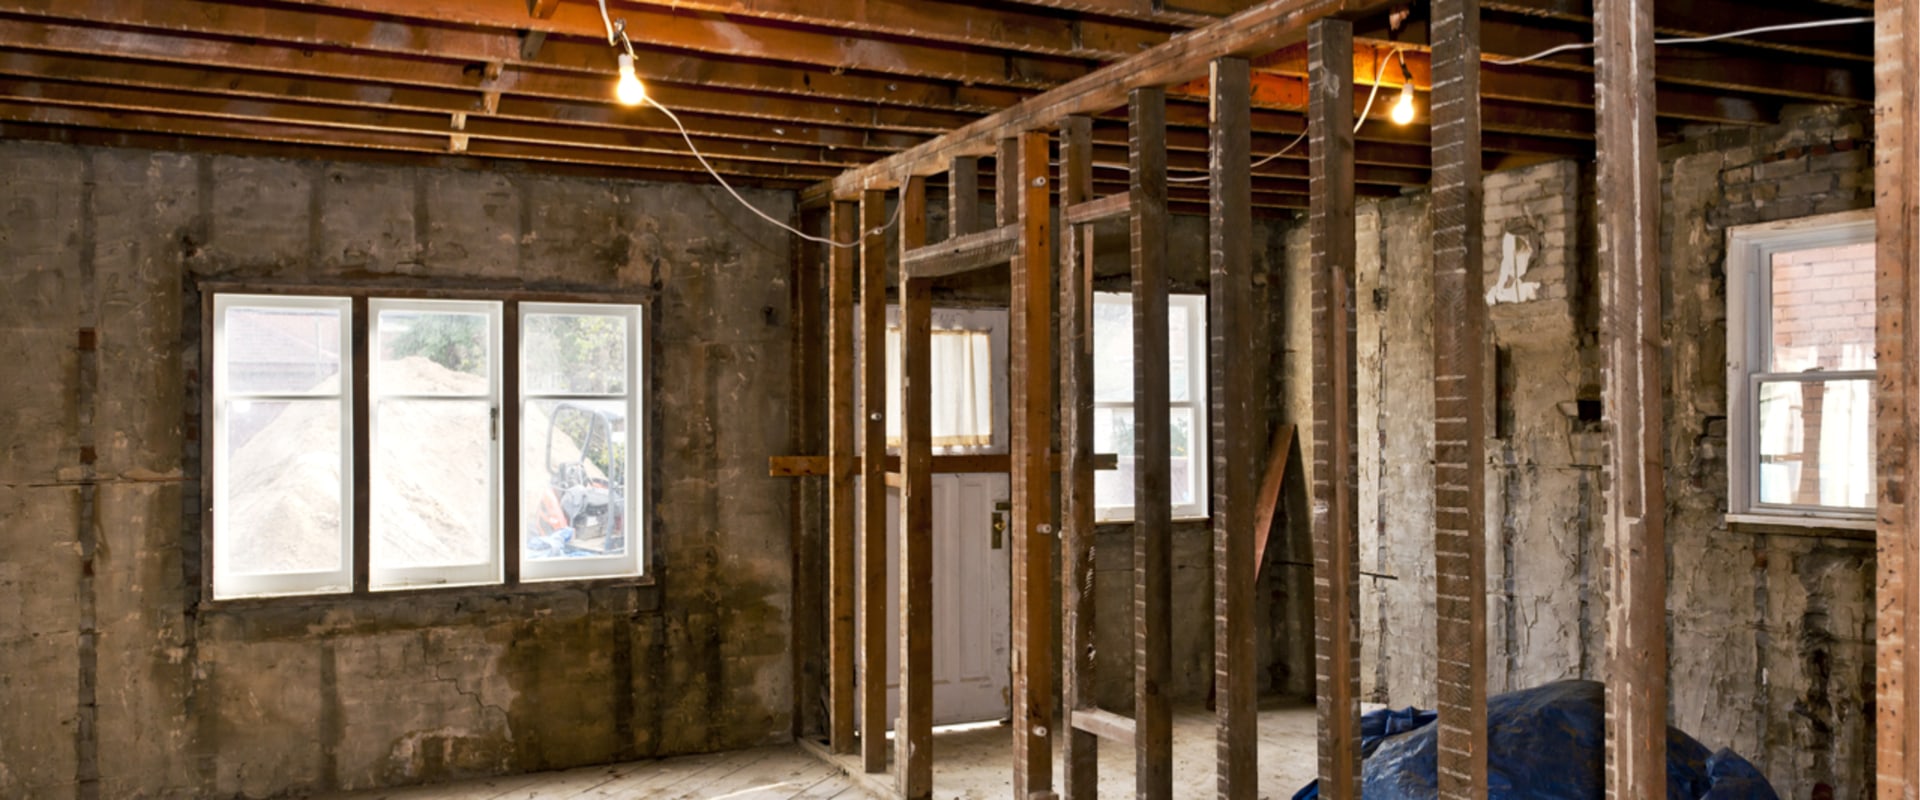 Is it cheaper to rebuild or remodel a house?